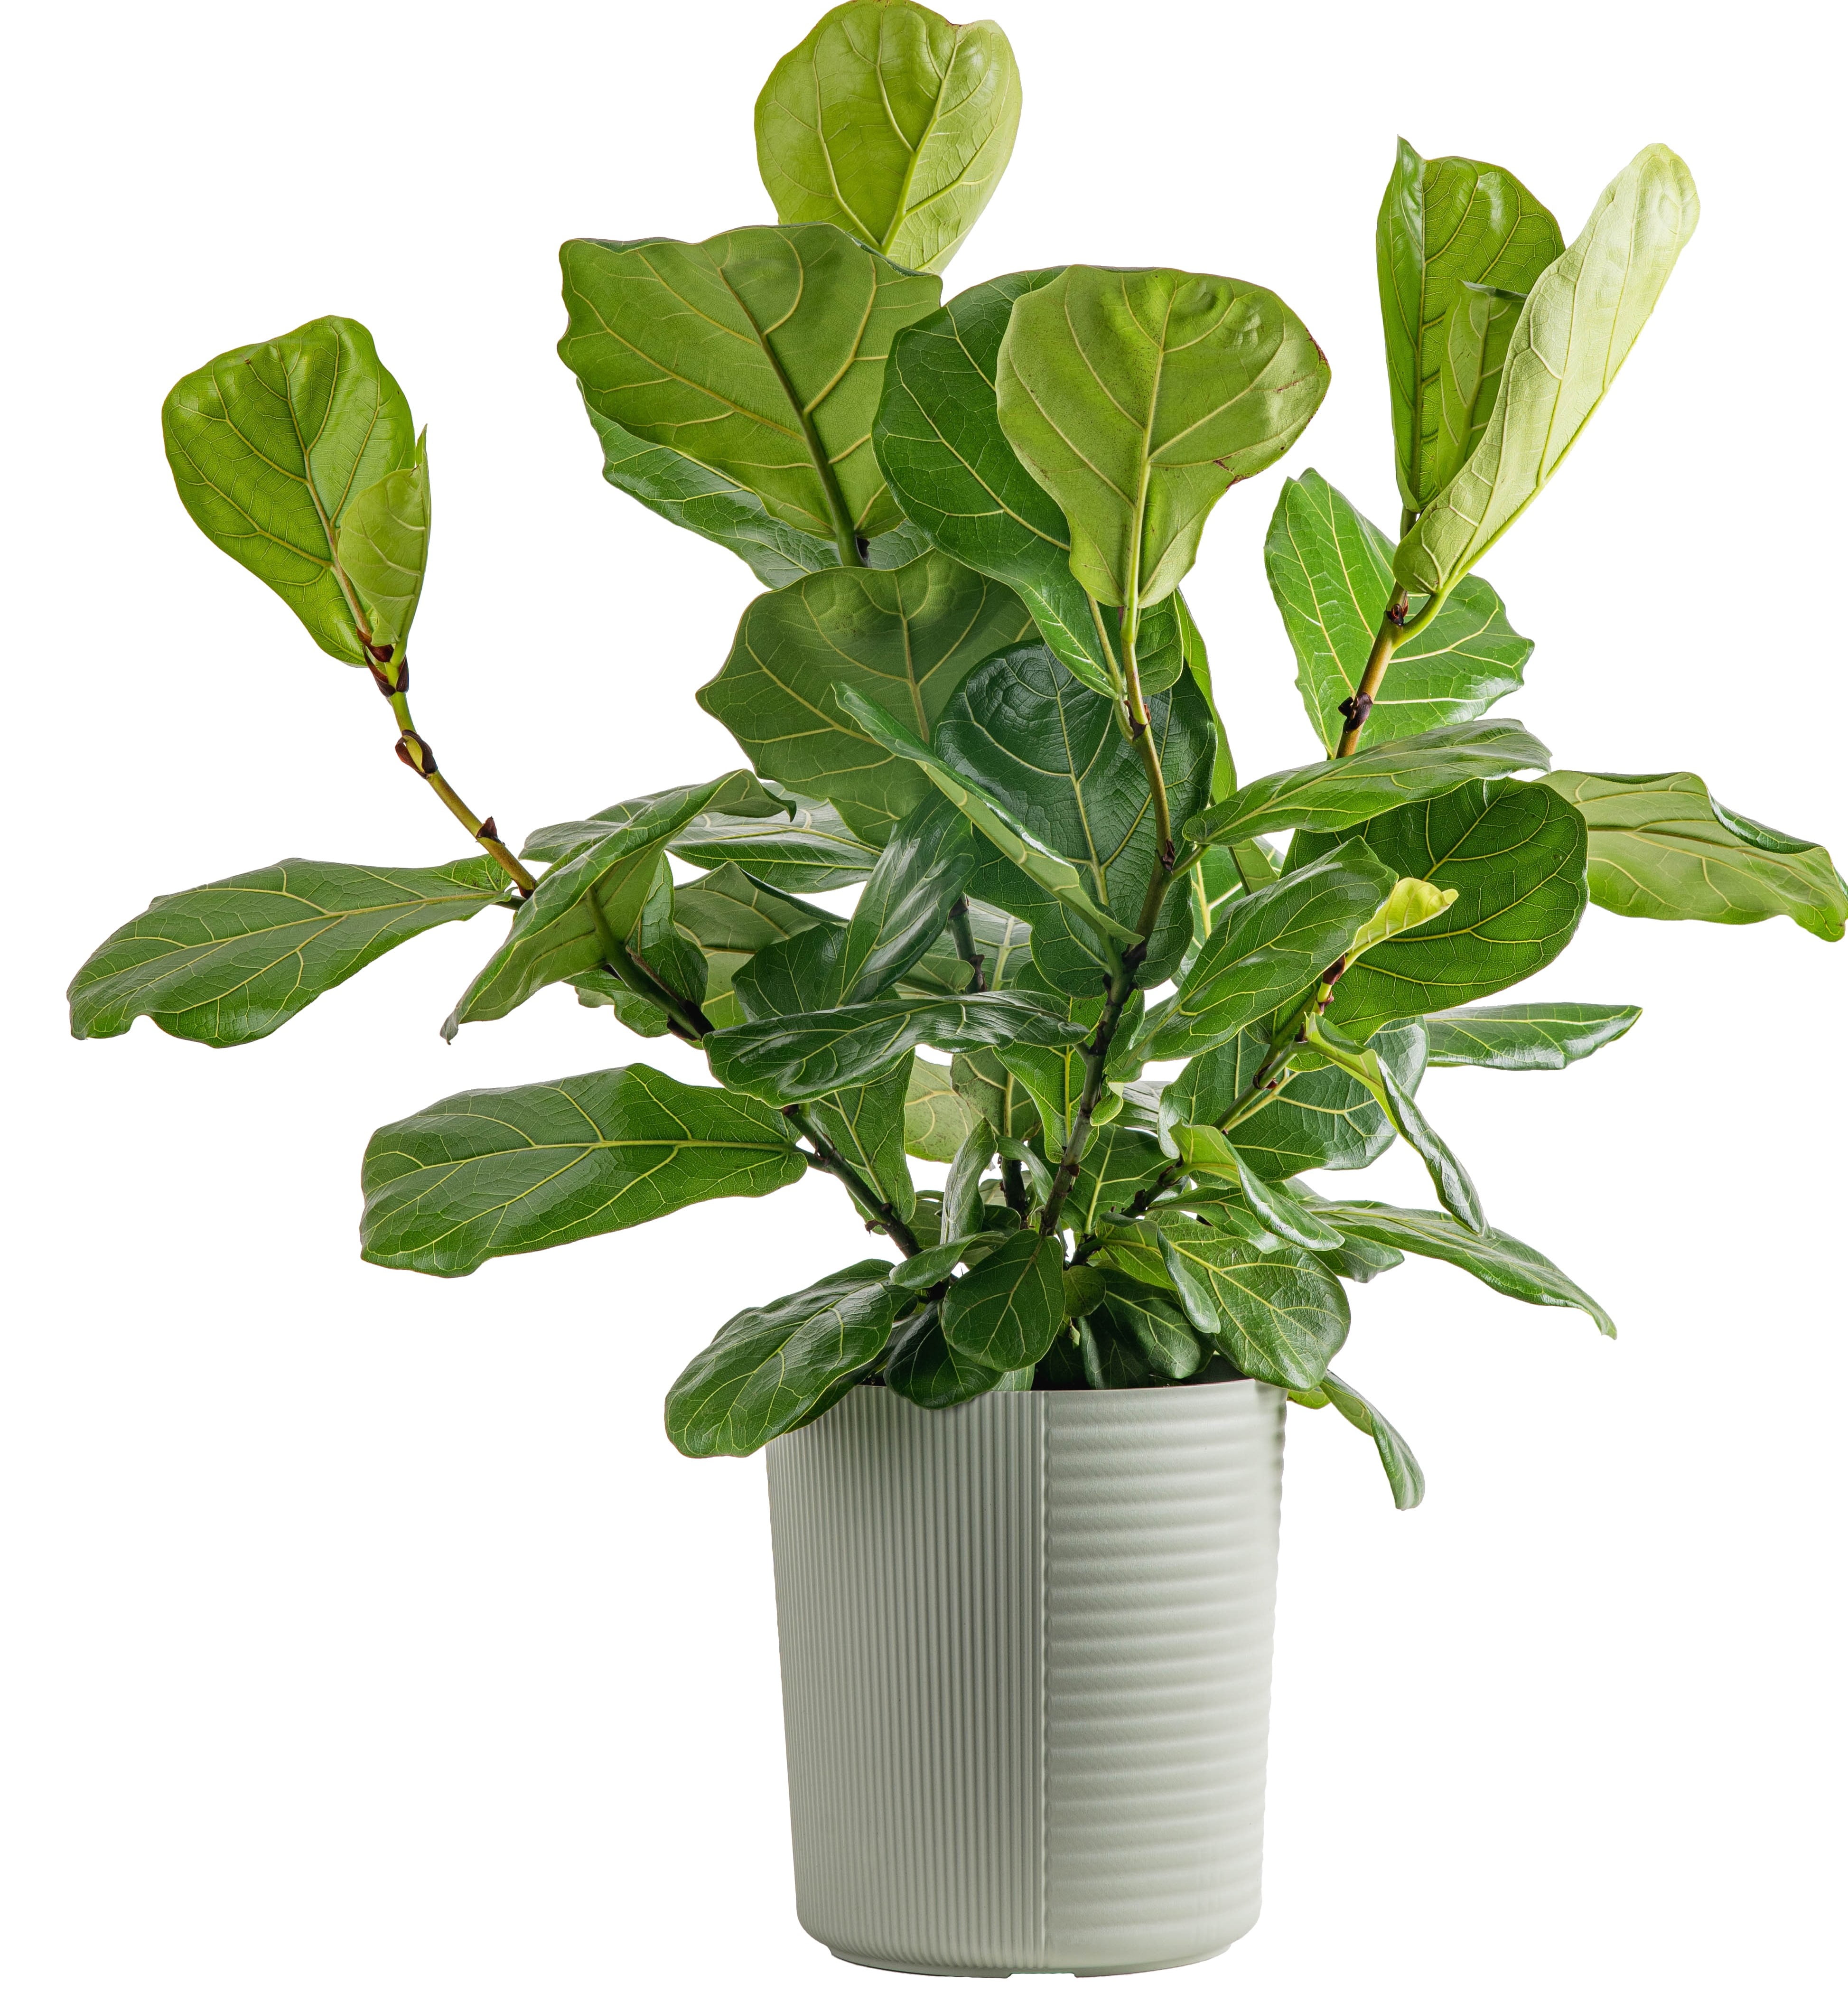 Costa Farms Plants With Benefits Live Indoor Plant Green Fiddle Leaf Fig Plant In 10in Decor Pot